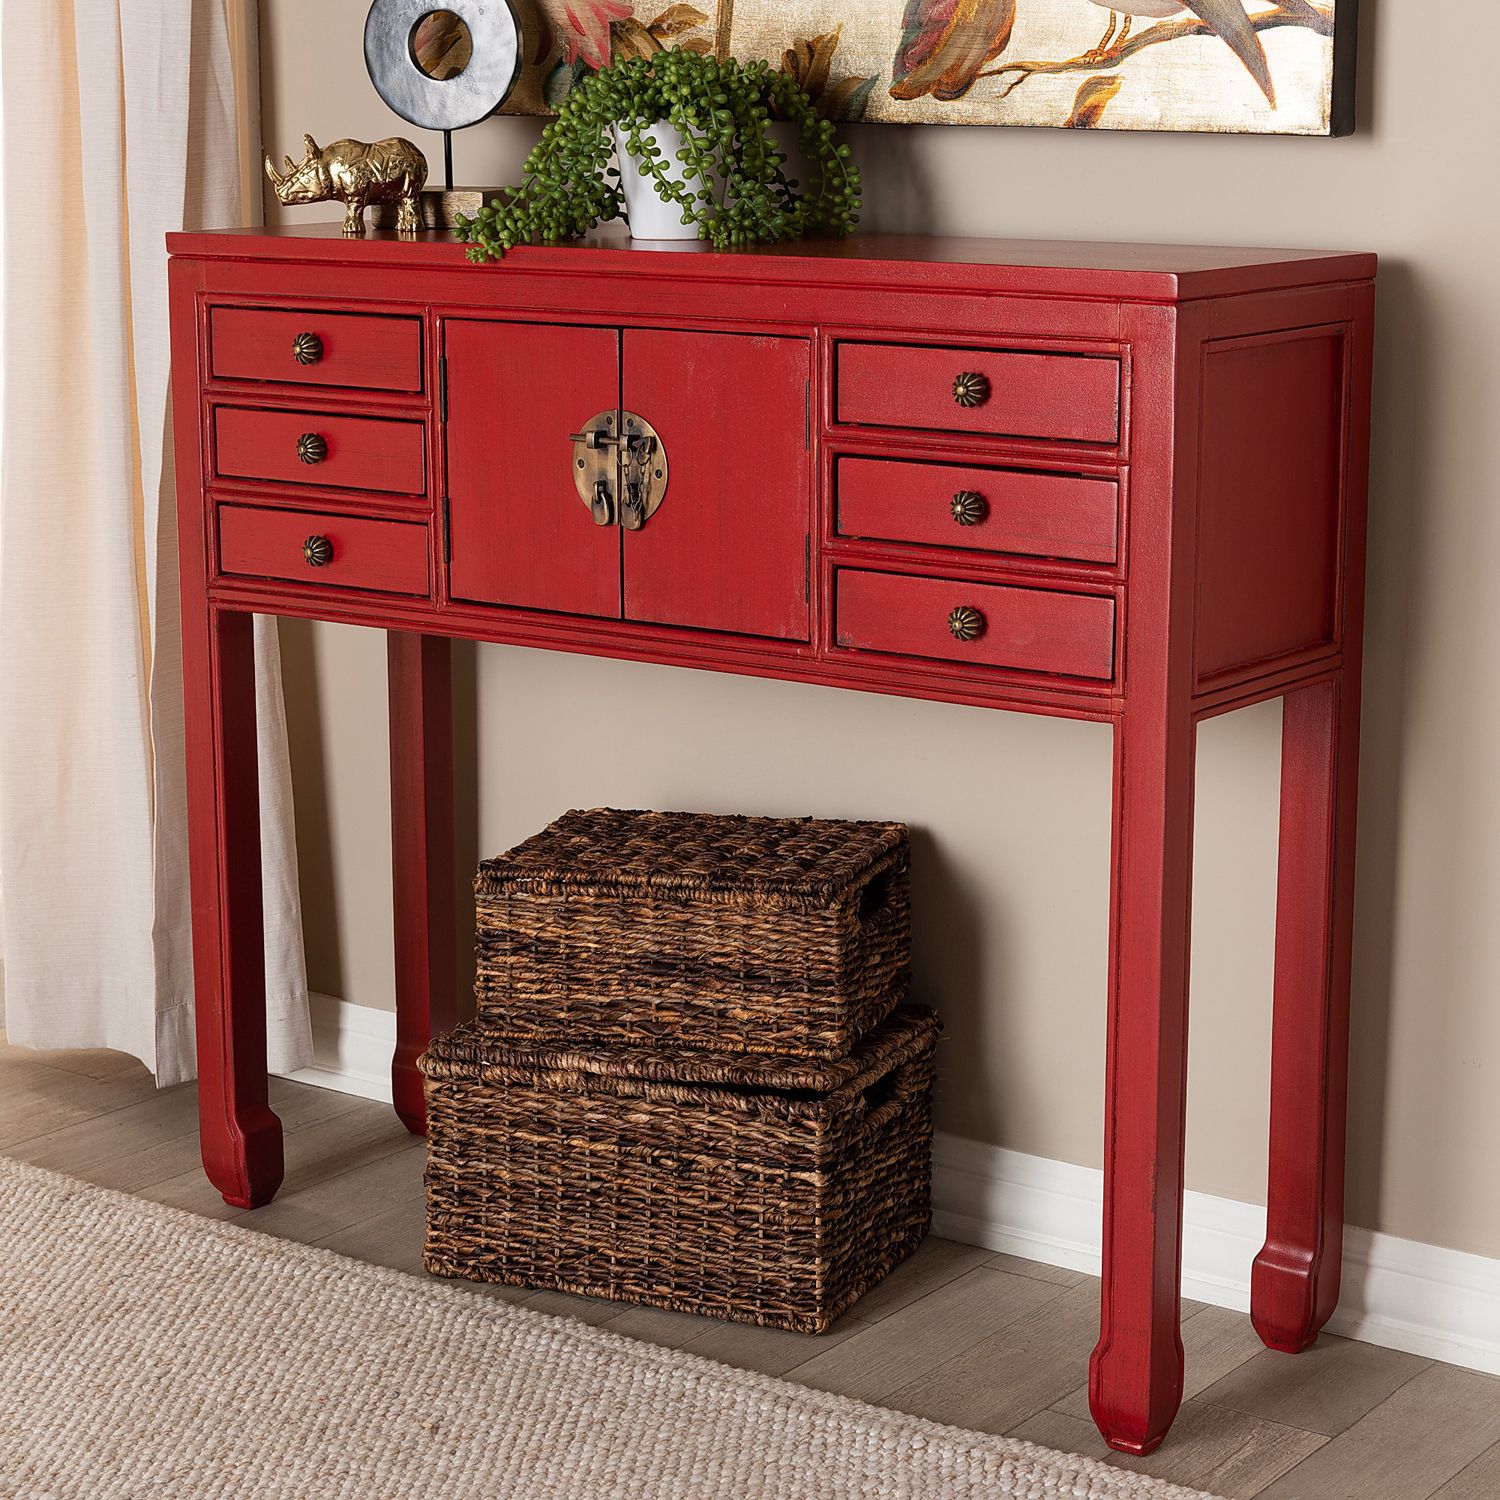 Rosette Red Wood Console Table – Pier1 Within Wood Console Tables (View 5 of 20)